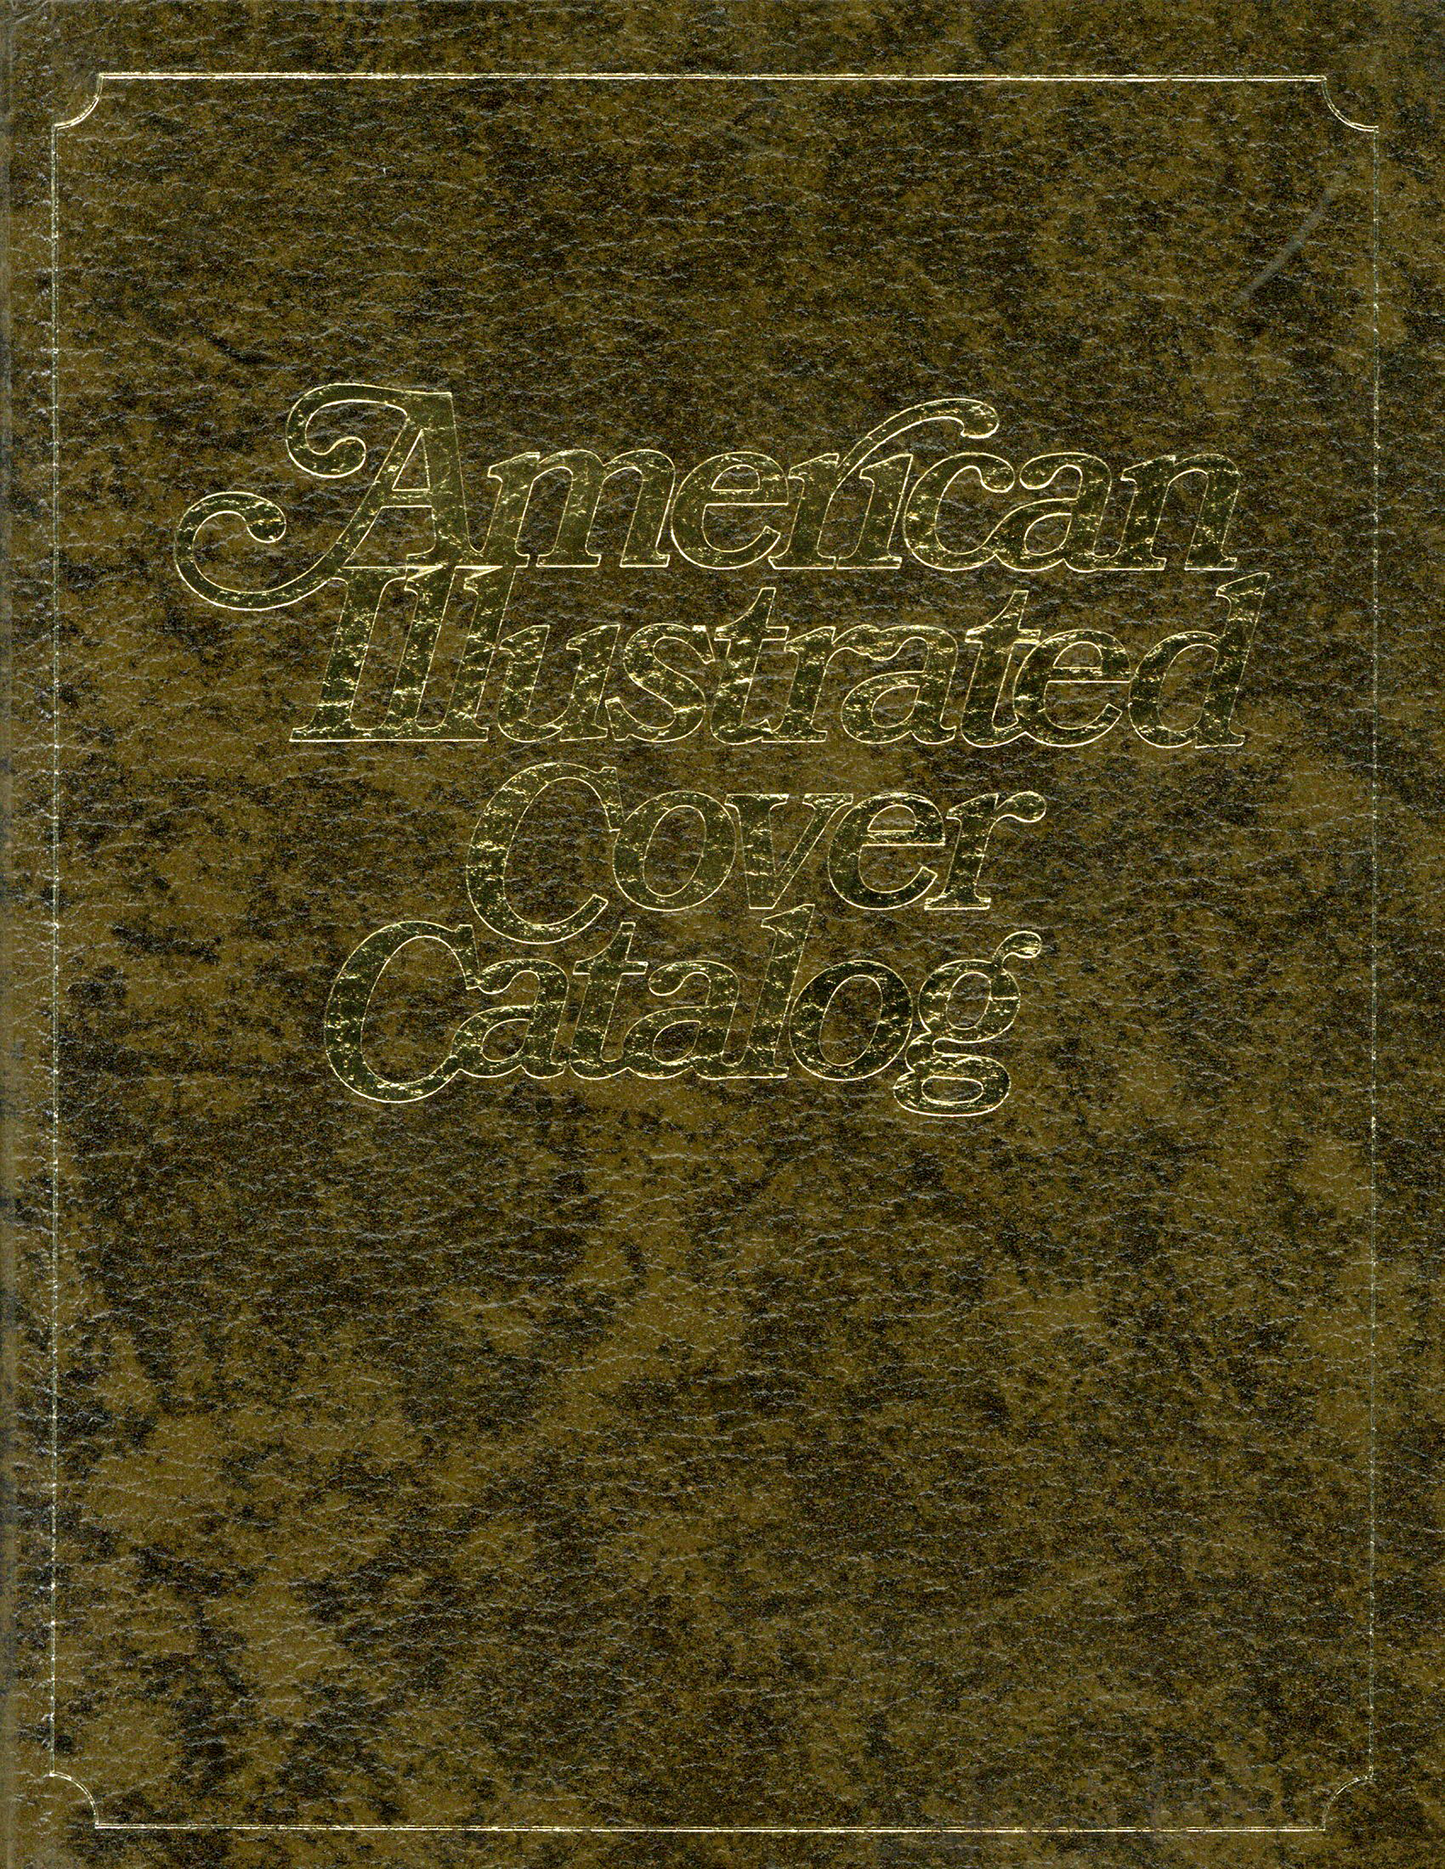 American Illustrated Cover Catalog - Hard